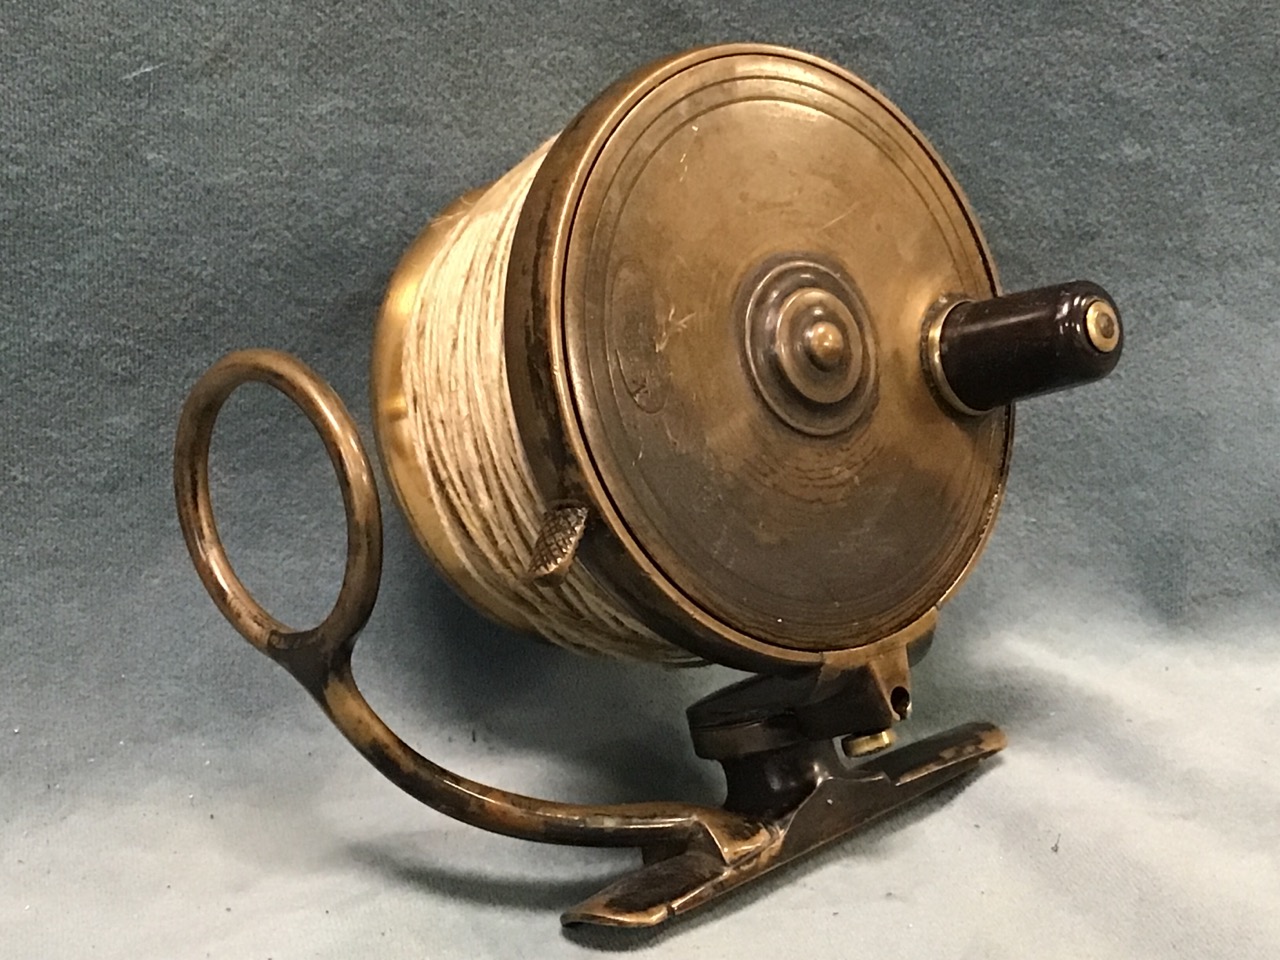 An early Malloch patent brass side casting fishing reel with dished drum and adjustagle line guide